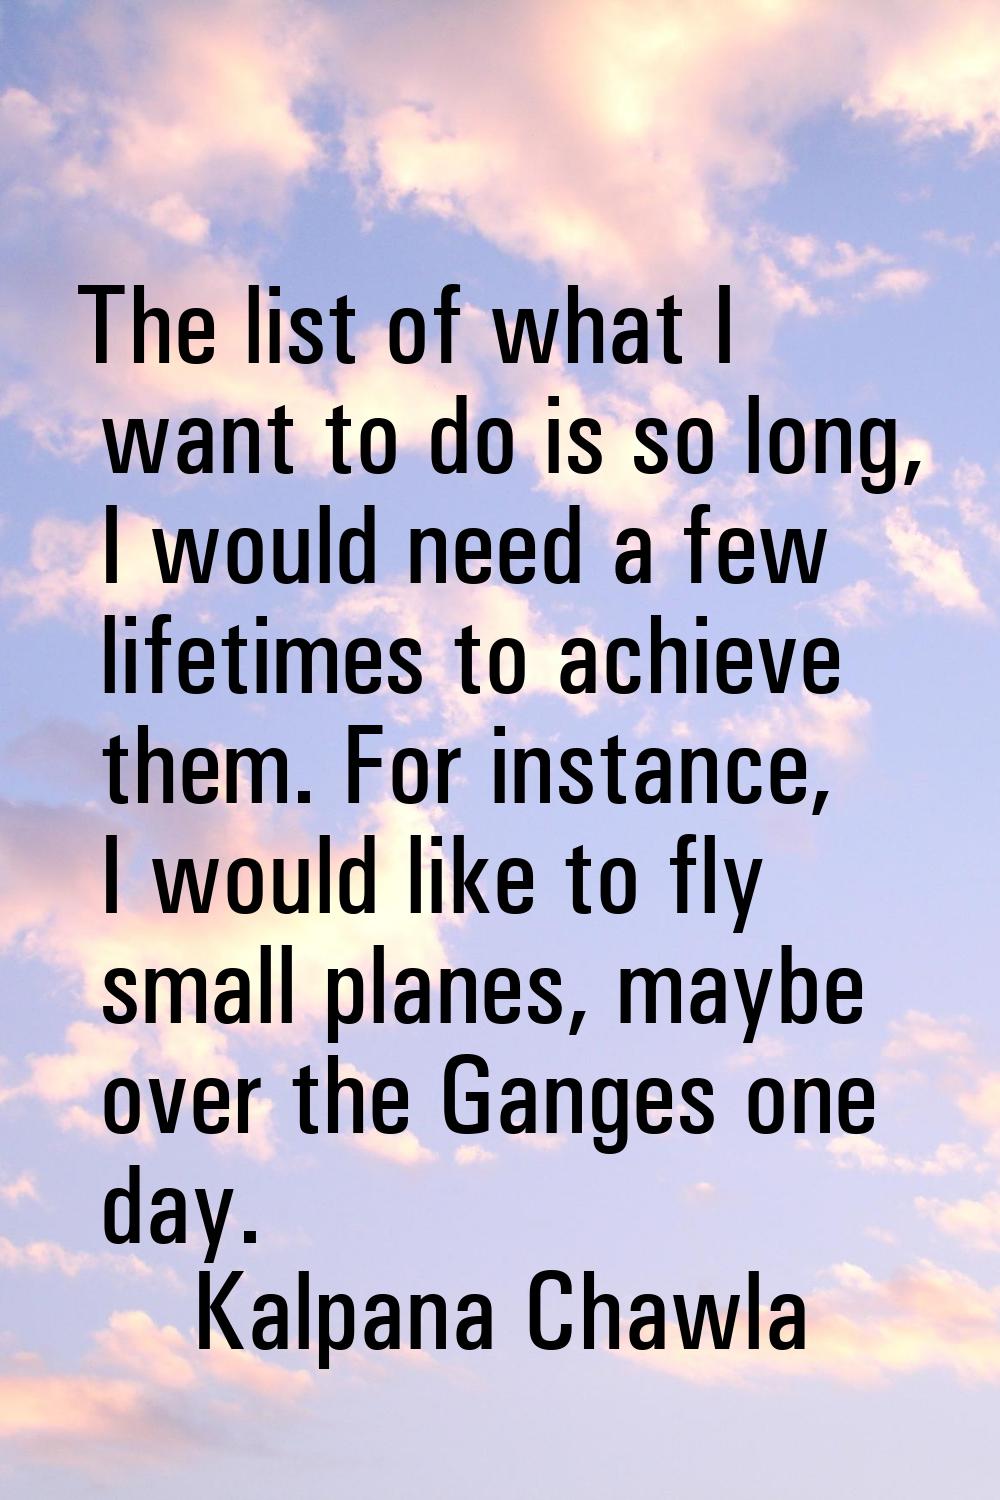 The list of what I want to do is so long, I would need a few lifetimes to achieve them. For instanc